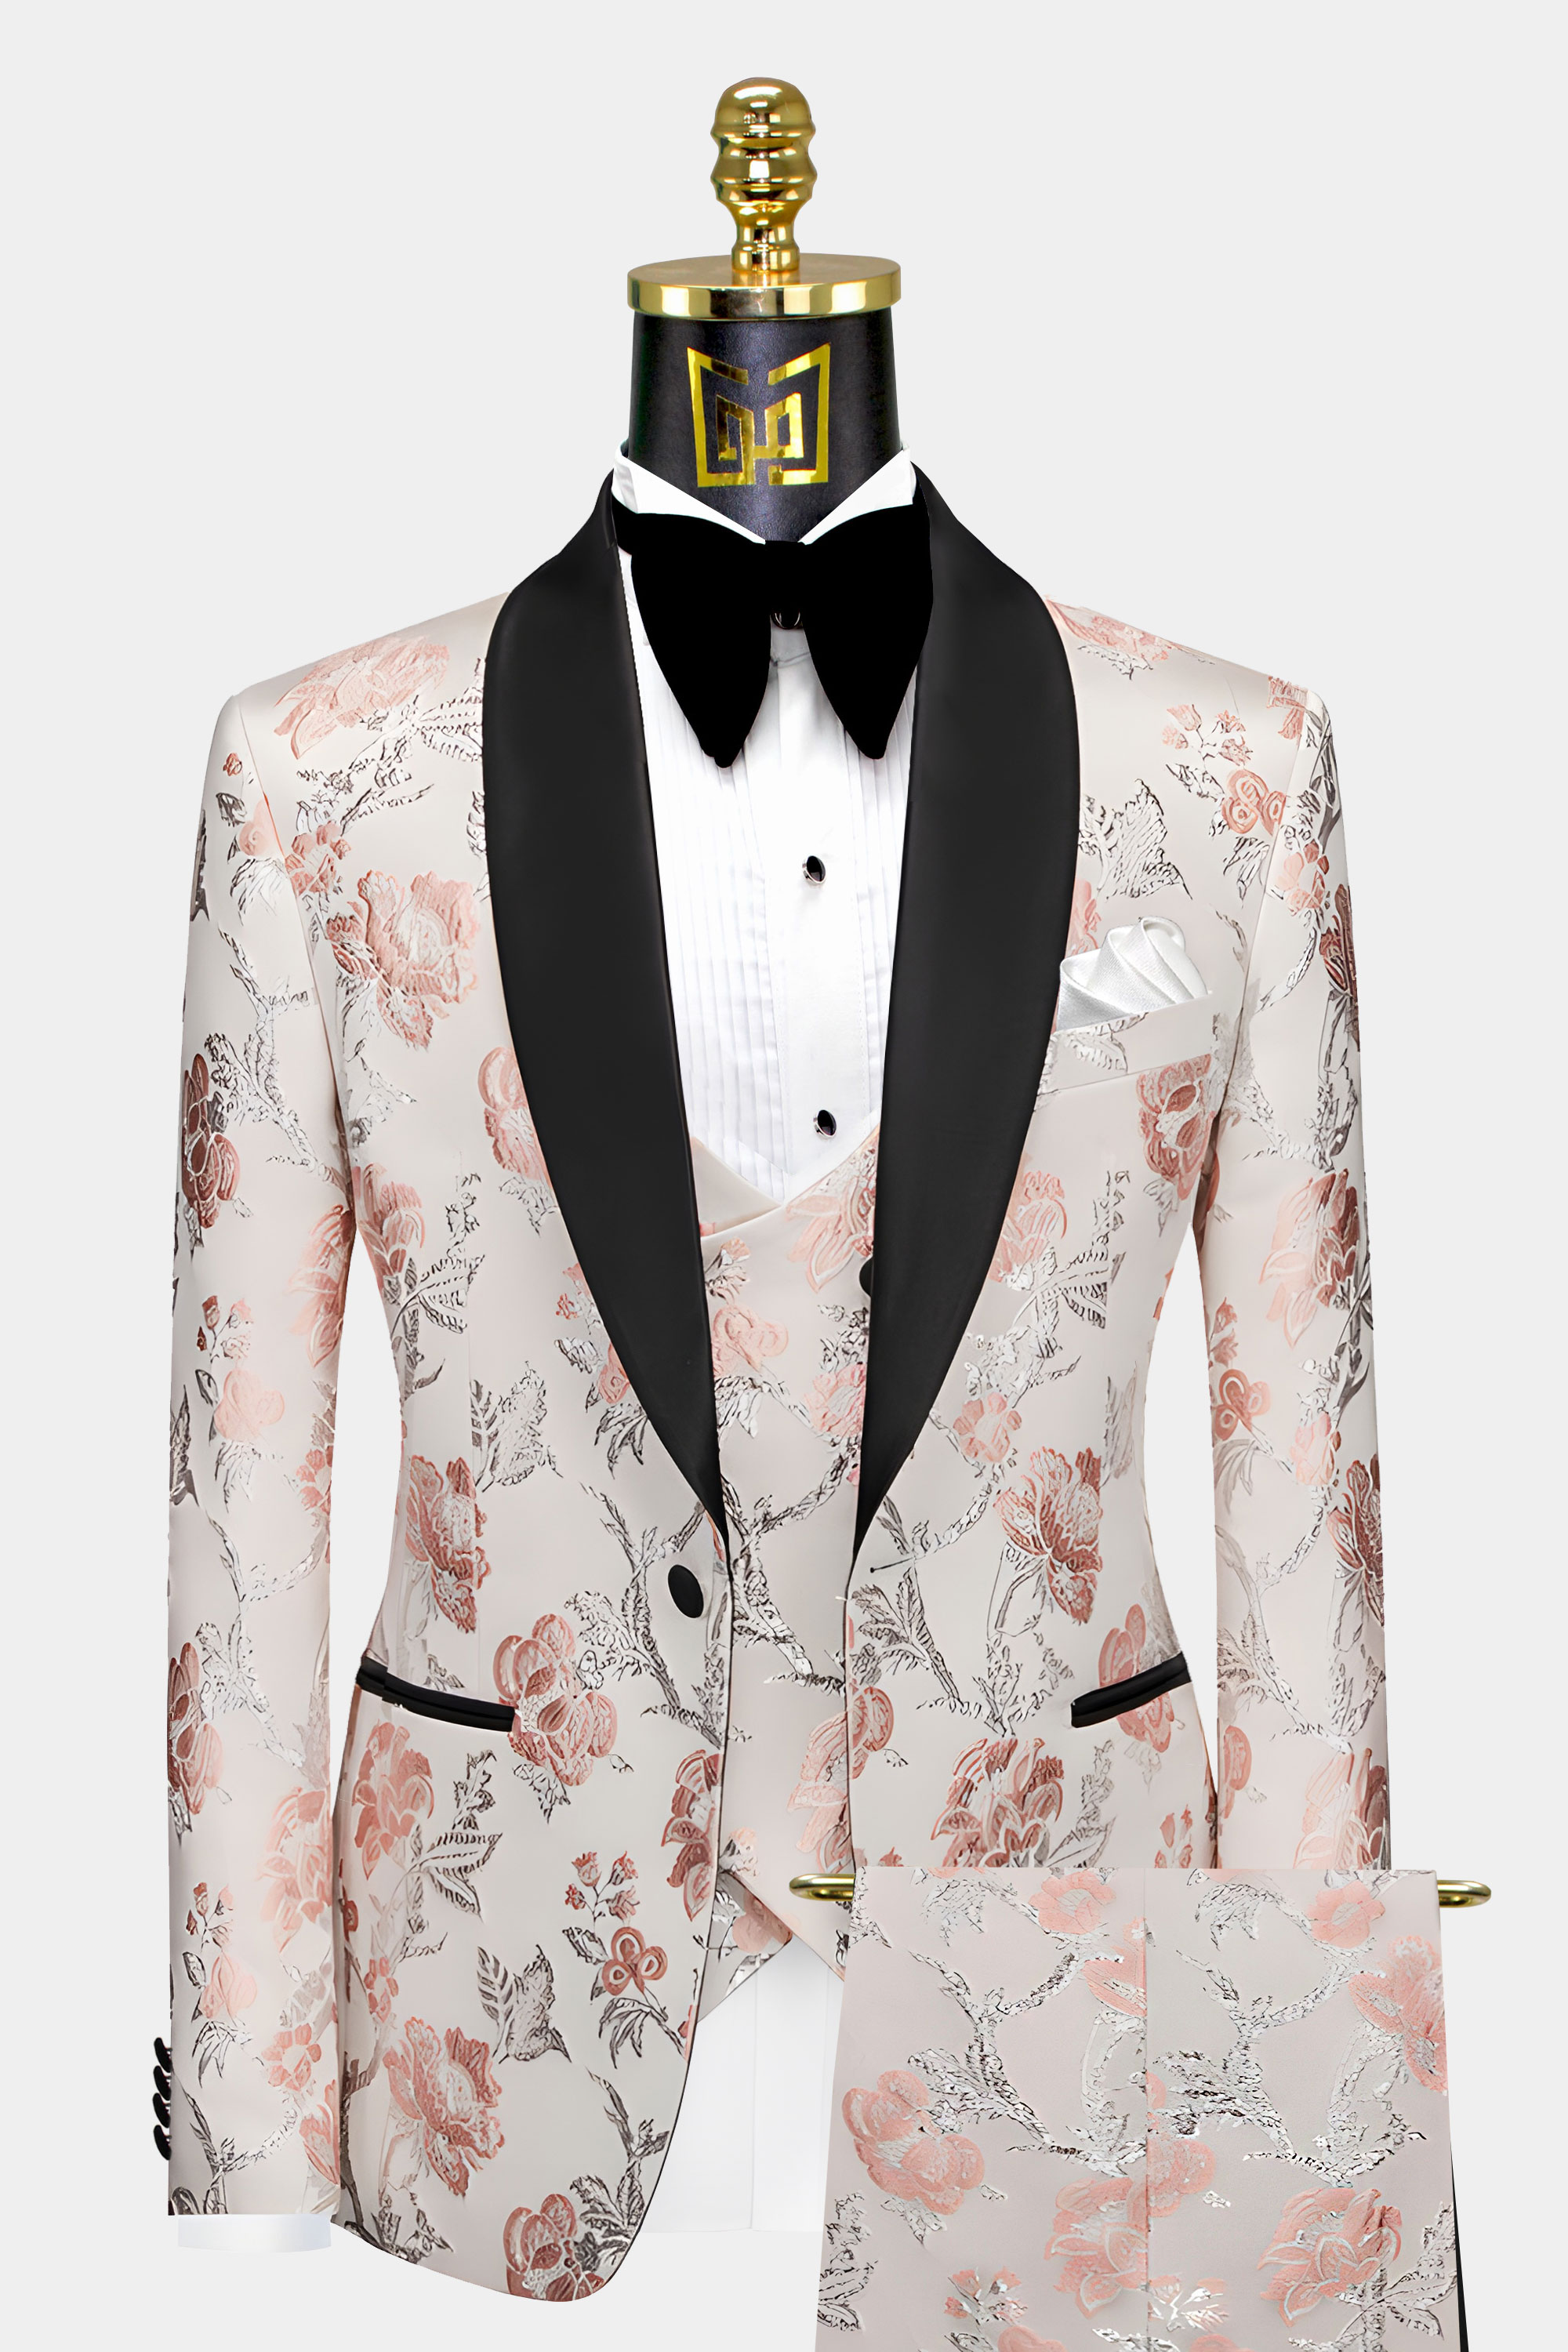 Hipster formal suit tuxedo. Difference between vintage and classic